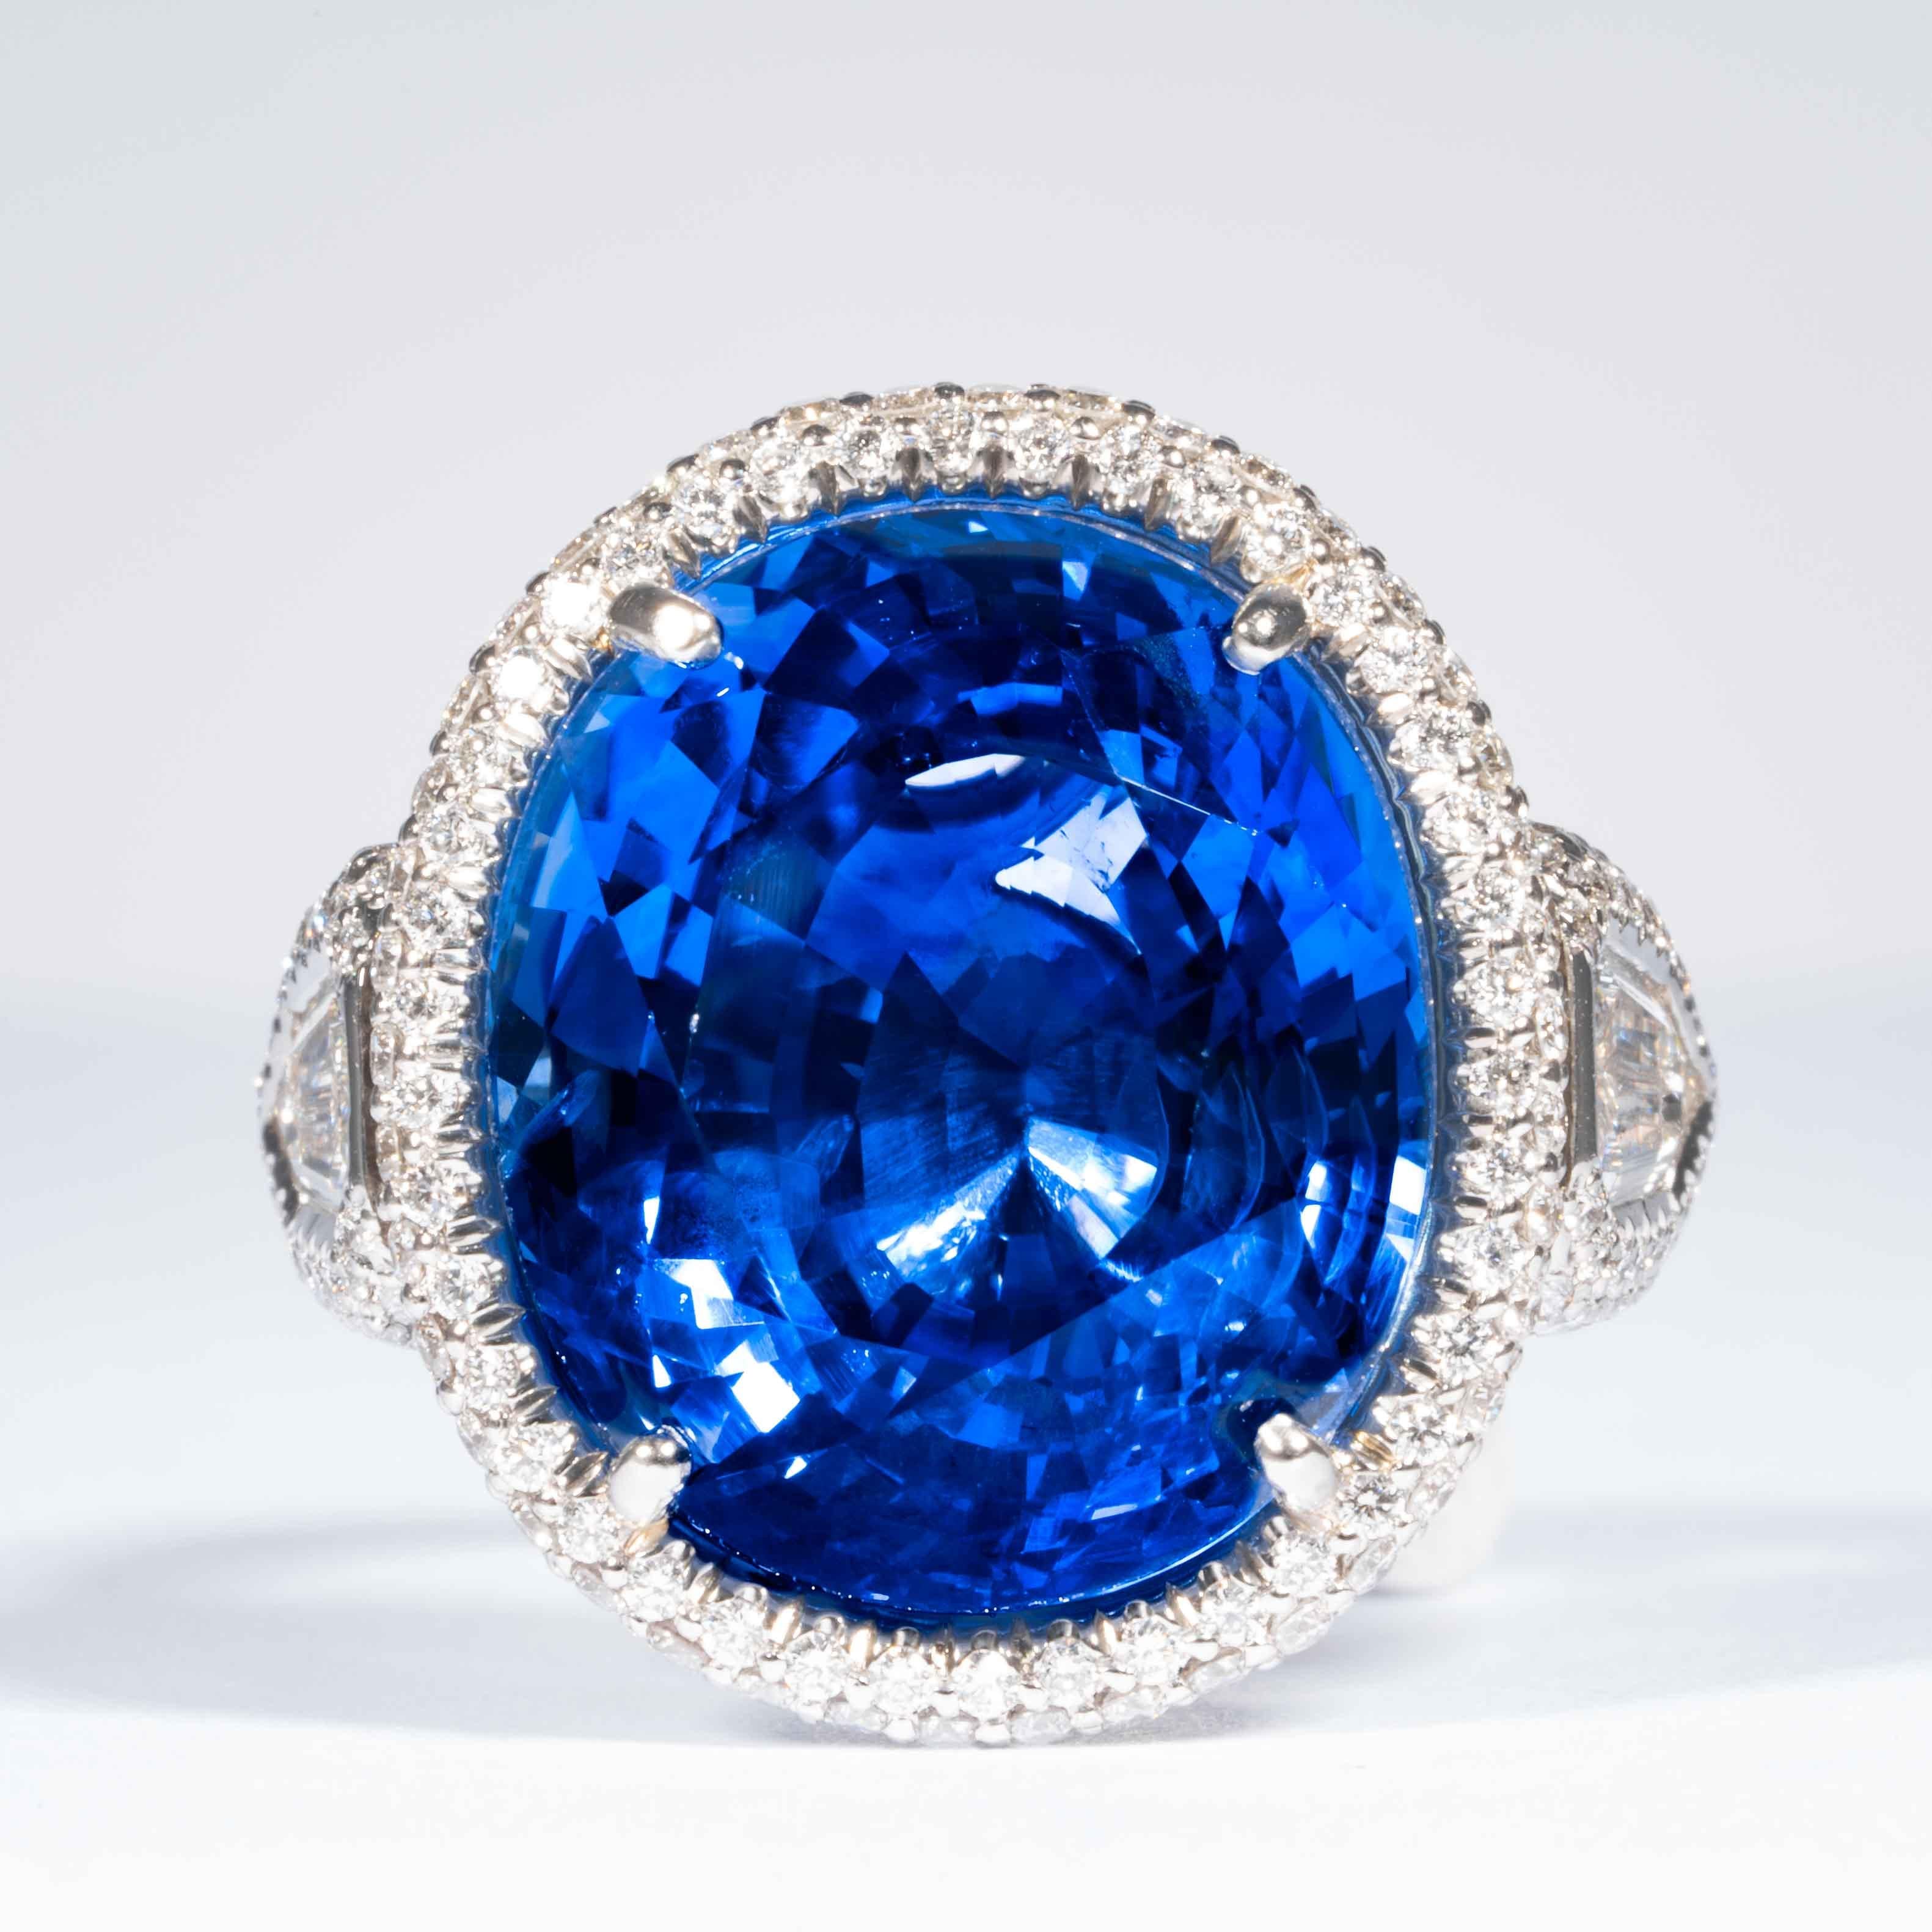 This sapphire and diamond cluster ring is offered by Shreve, Crump & Low.  This blue oval cut sapphire is custom set in a handcrafted Shreve, Crump & Low one-of-kind platinum cluster ring, consisting of 1 majestic cornflower blue oval cut sapphire